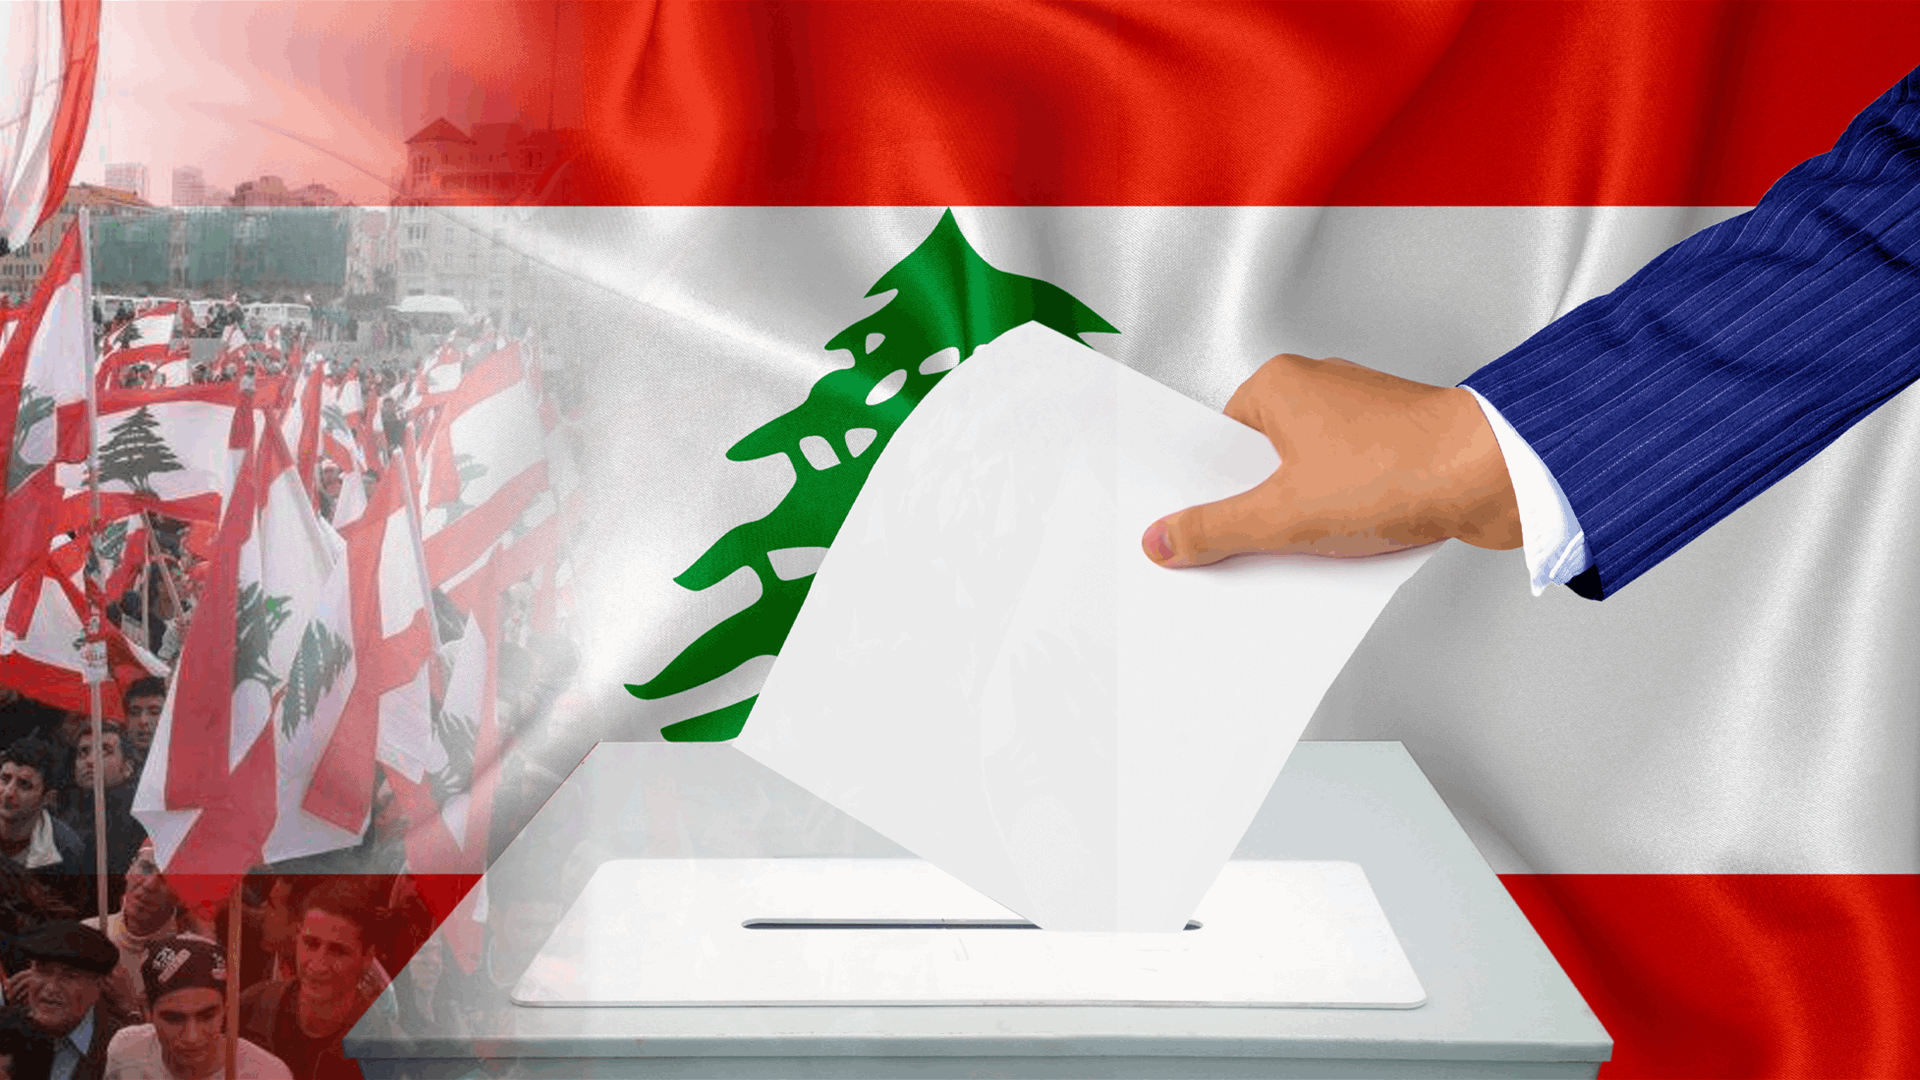 Where interests meet: Lebanese leaders find common ground in joint committees and municipal elections